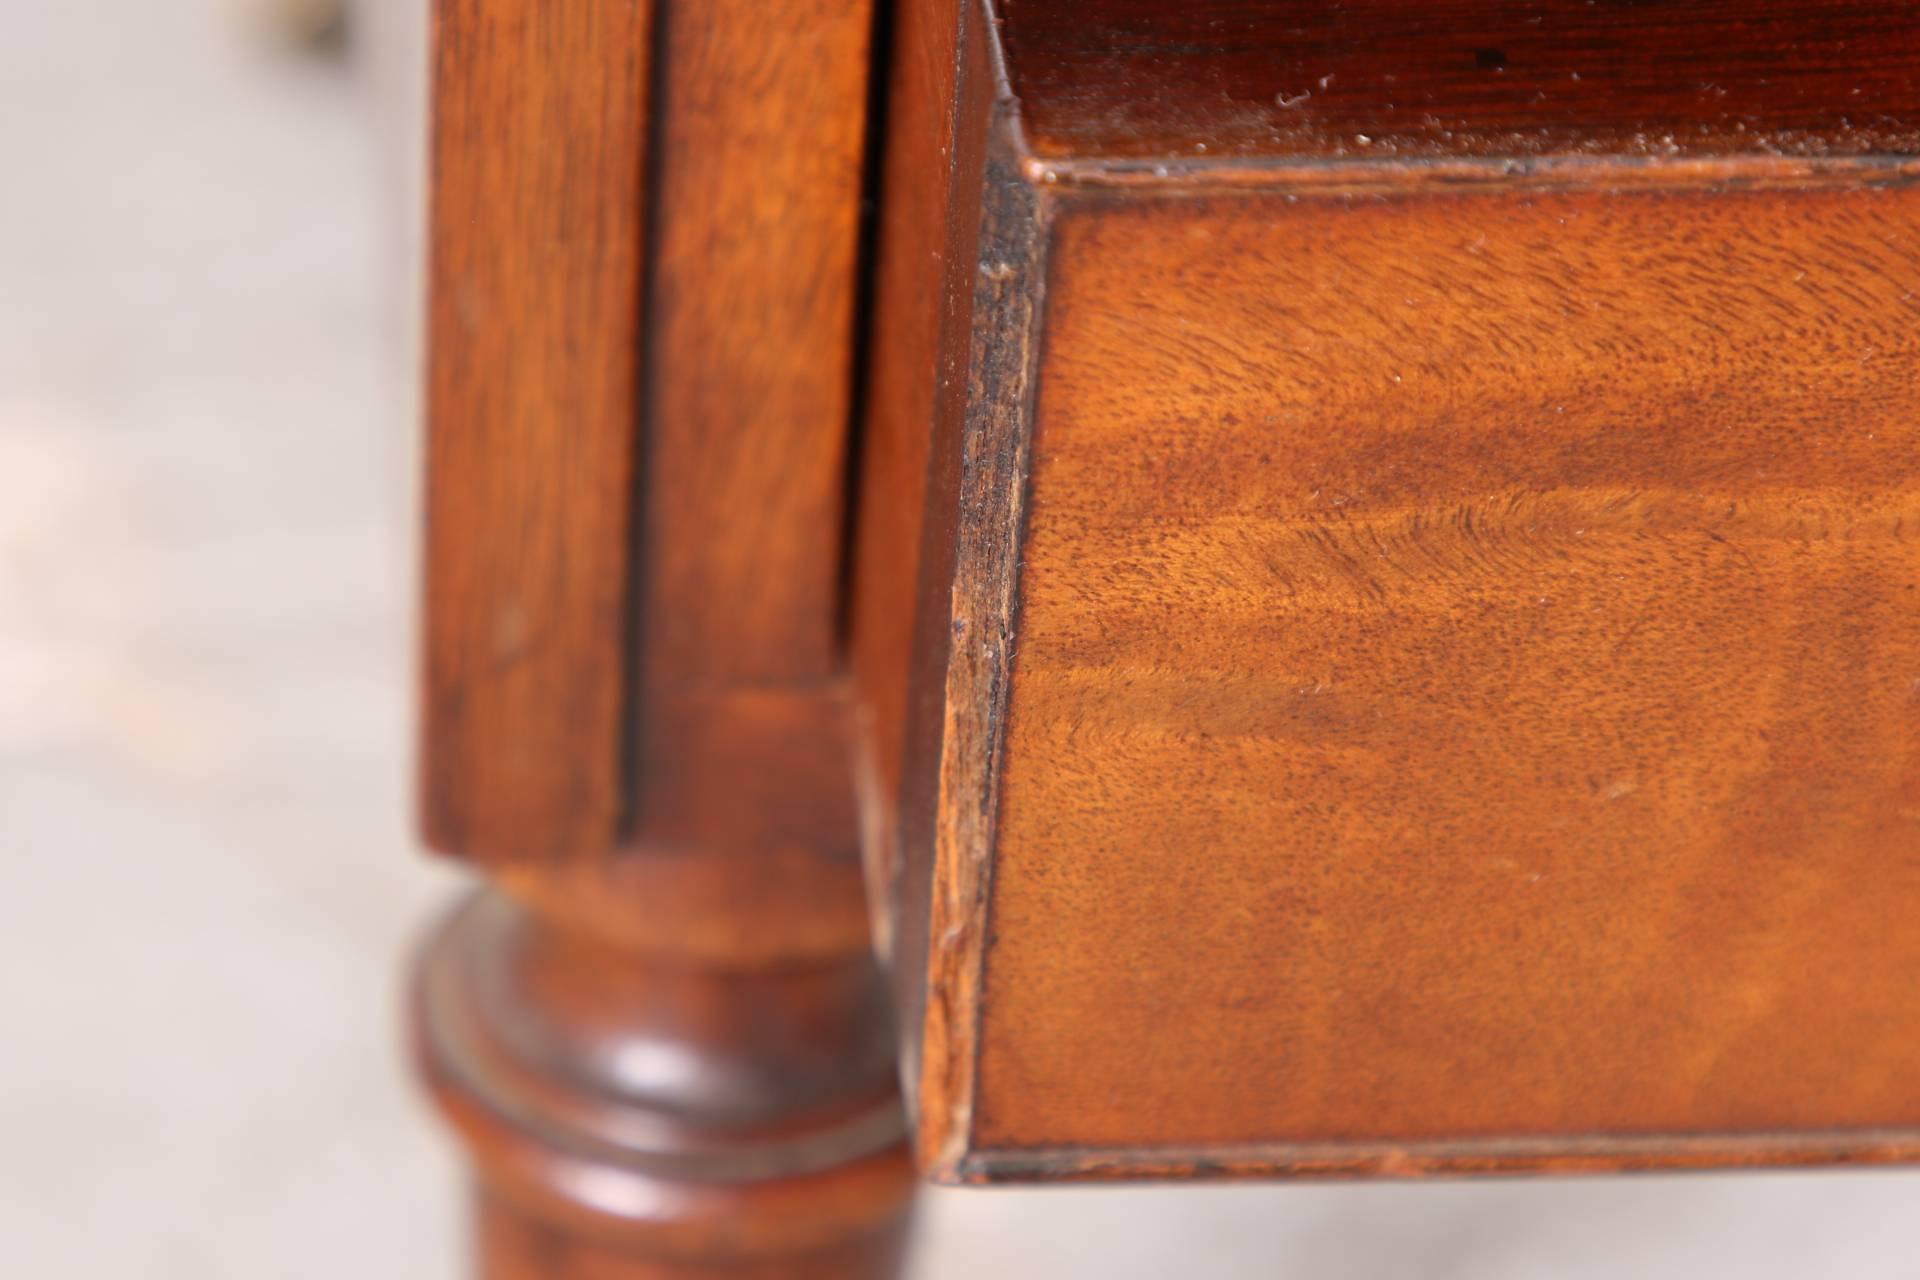 American Pair of Charak Mahogany Open Stands